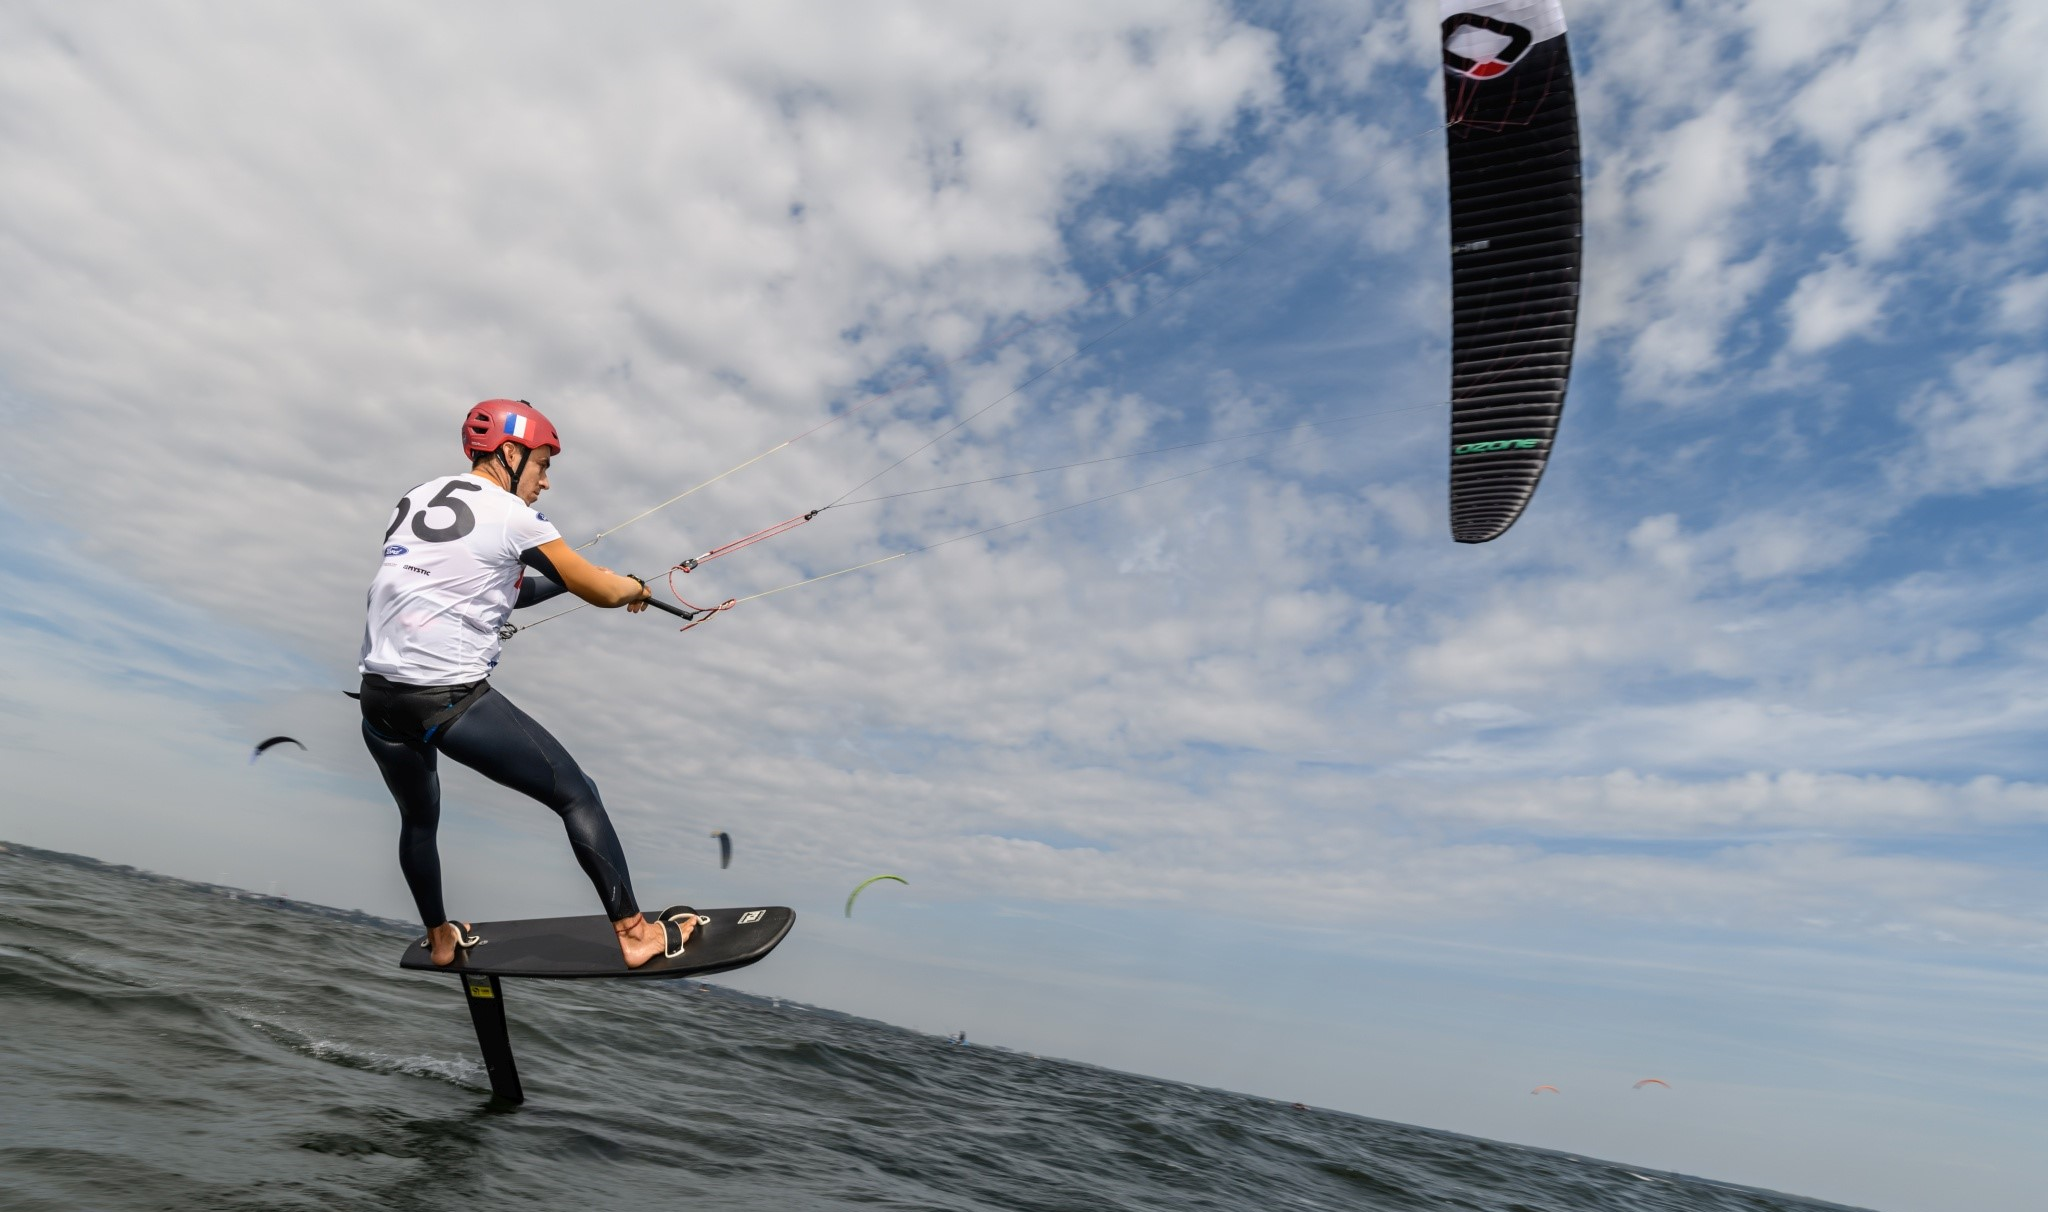 Three races were possible in the men's event at the Formula Kite Individual European Championships in Puck today ©Eureka/Dominik Kalamus